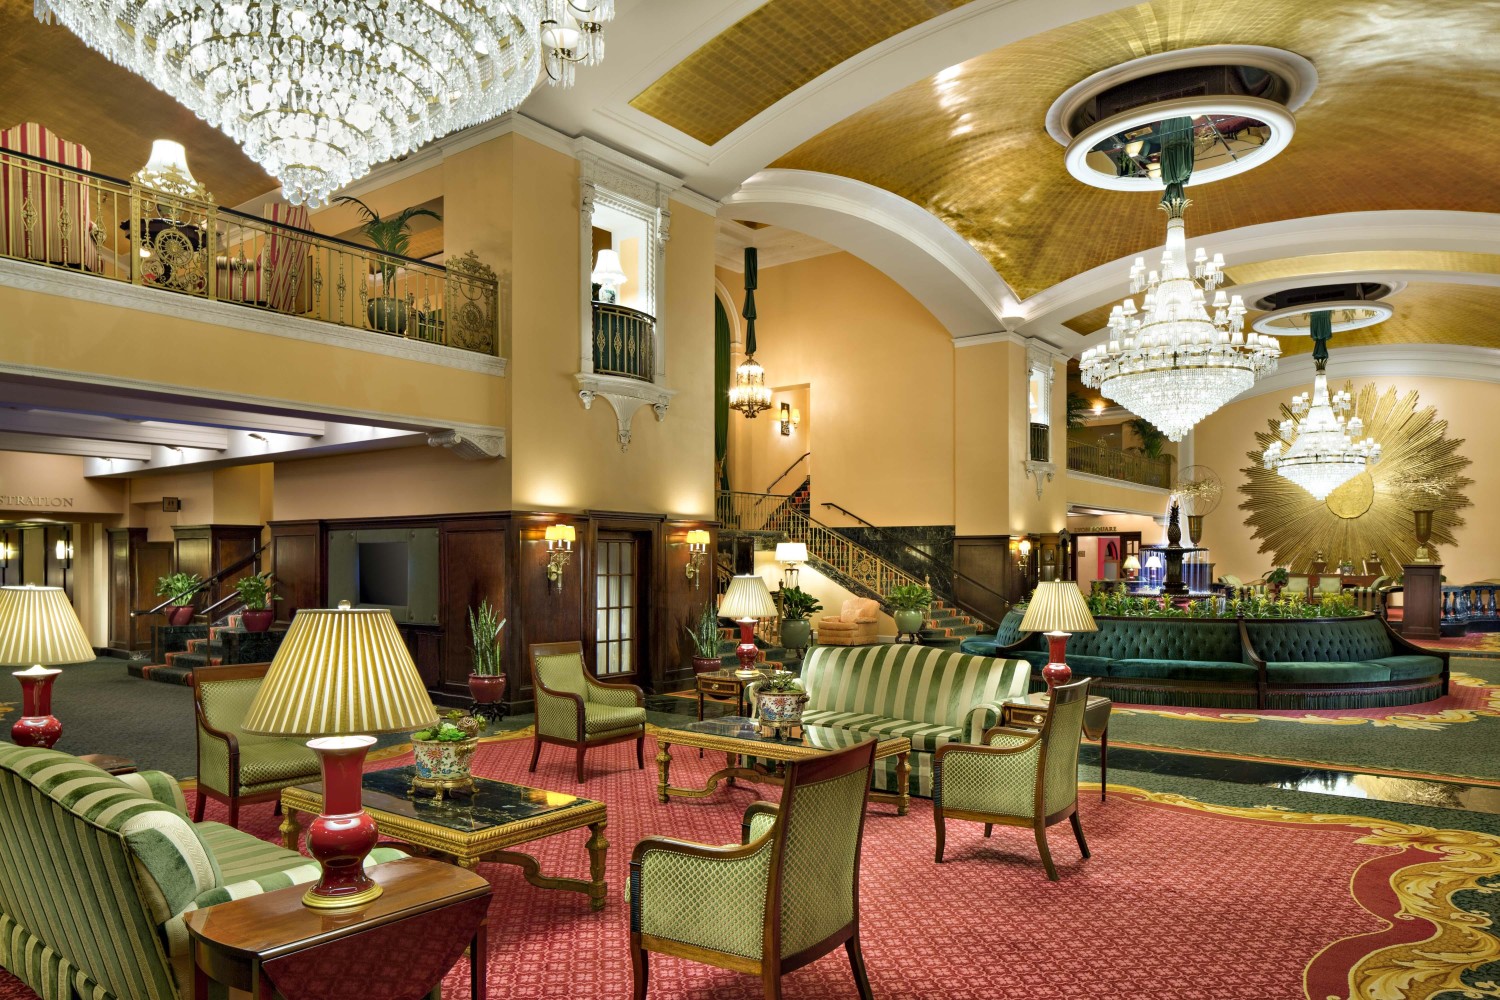 Amway Grand_Pantlind Lobby_Couches_Chairs_Tables_Lamps_Chandeliers_Stairs_Fountain_Gold Sunburst_Gold Ceiling